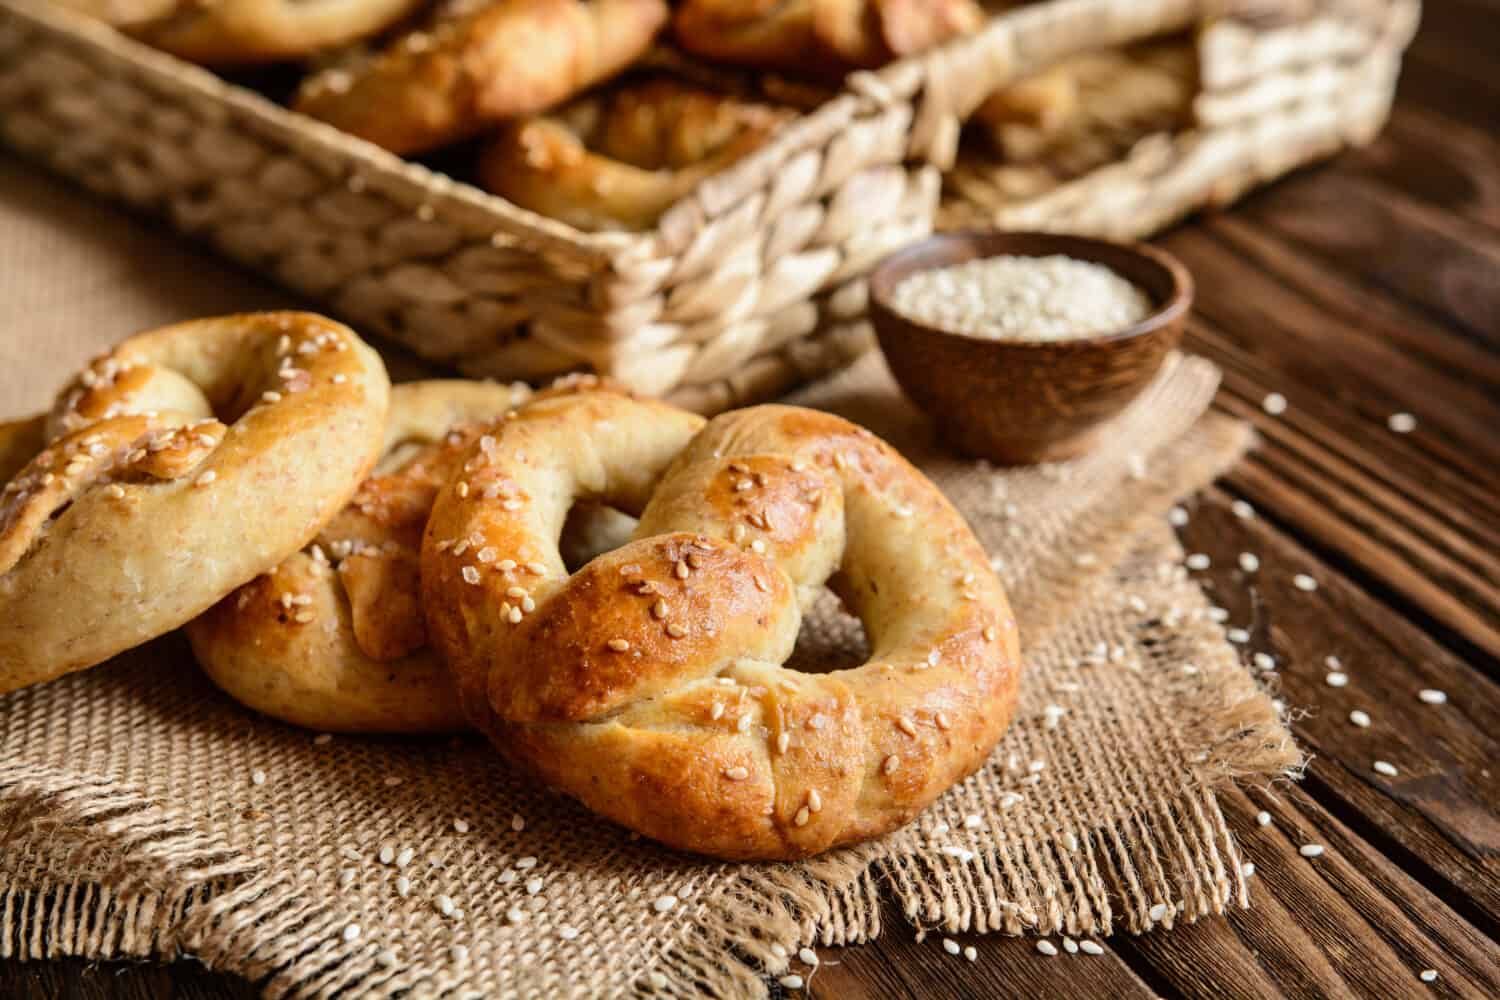 Homemade whole meal pretzels with sesame and salt